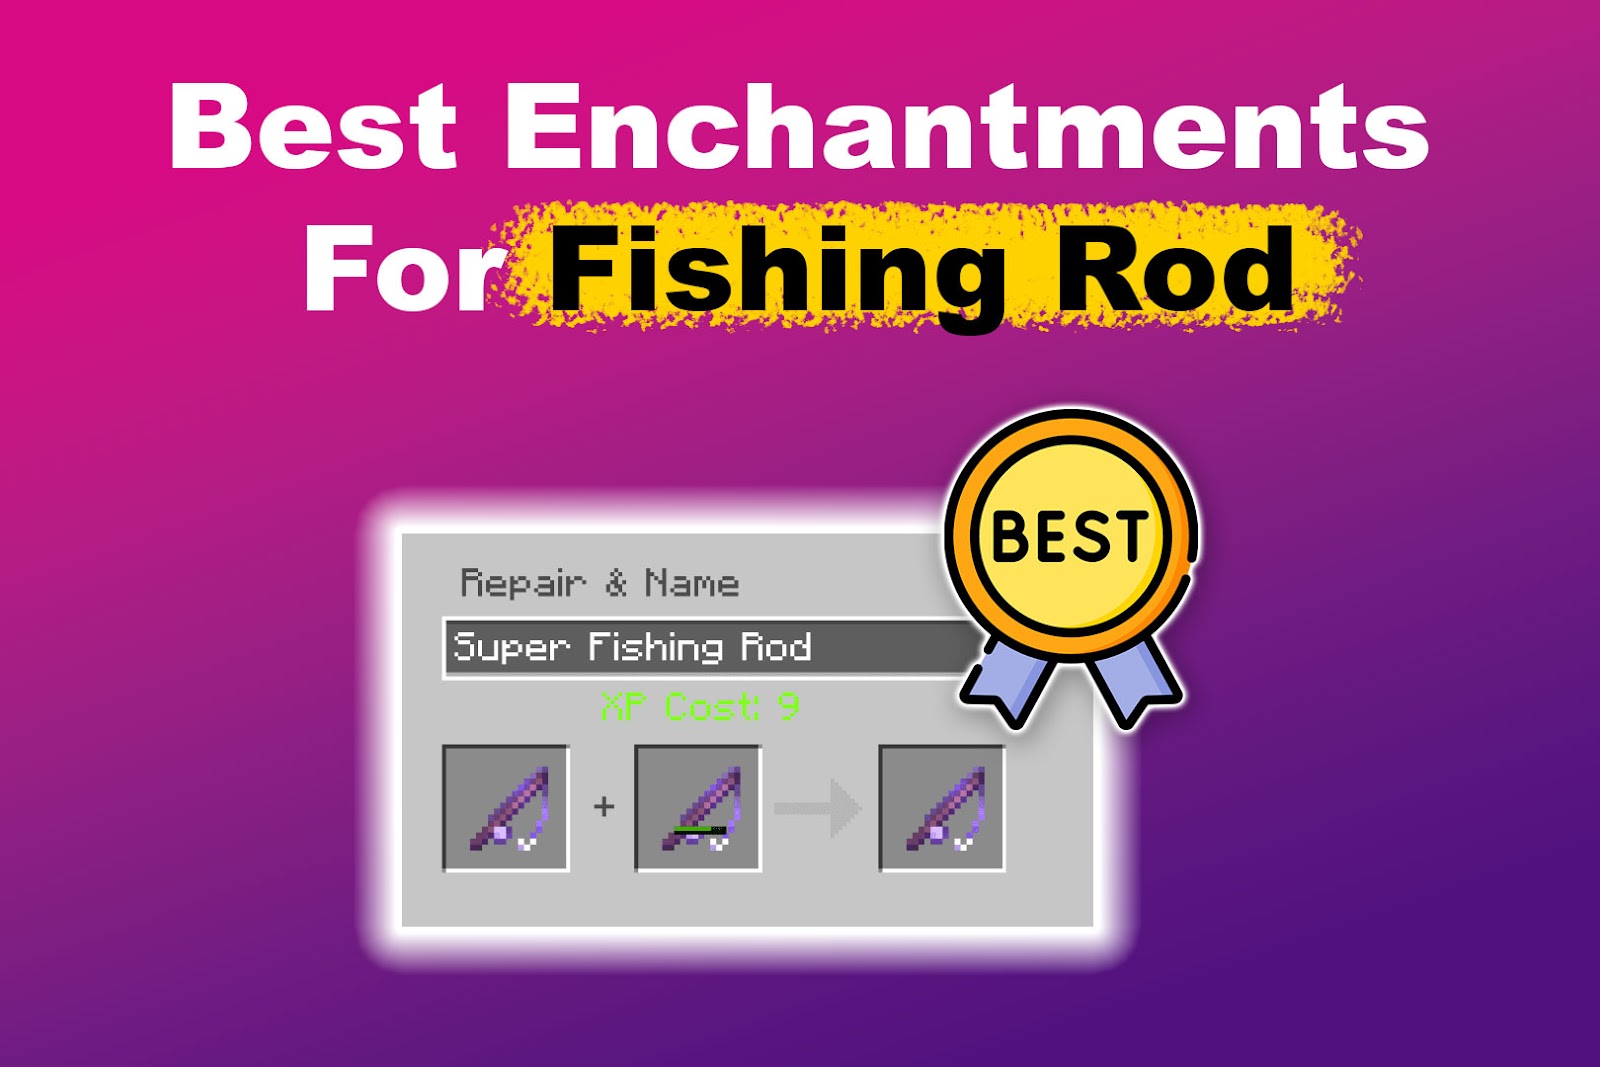 Best Enchantments For Fishing Rod